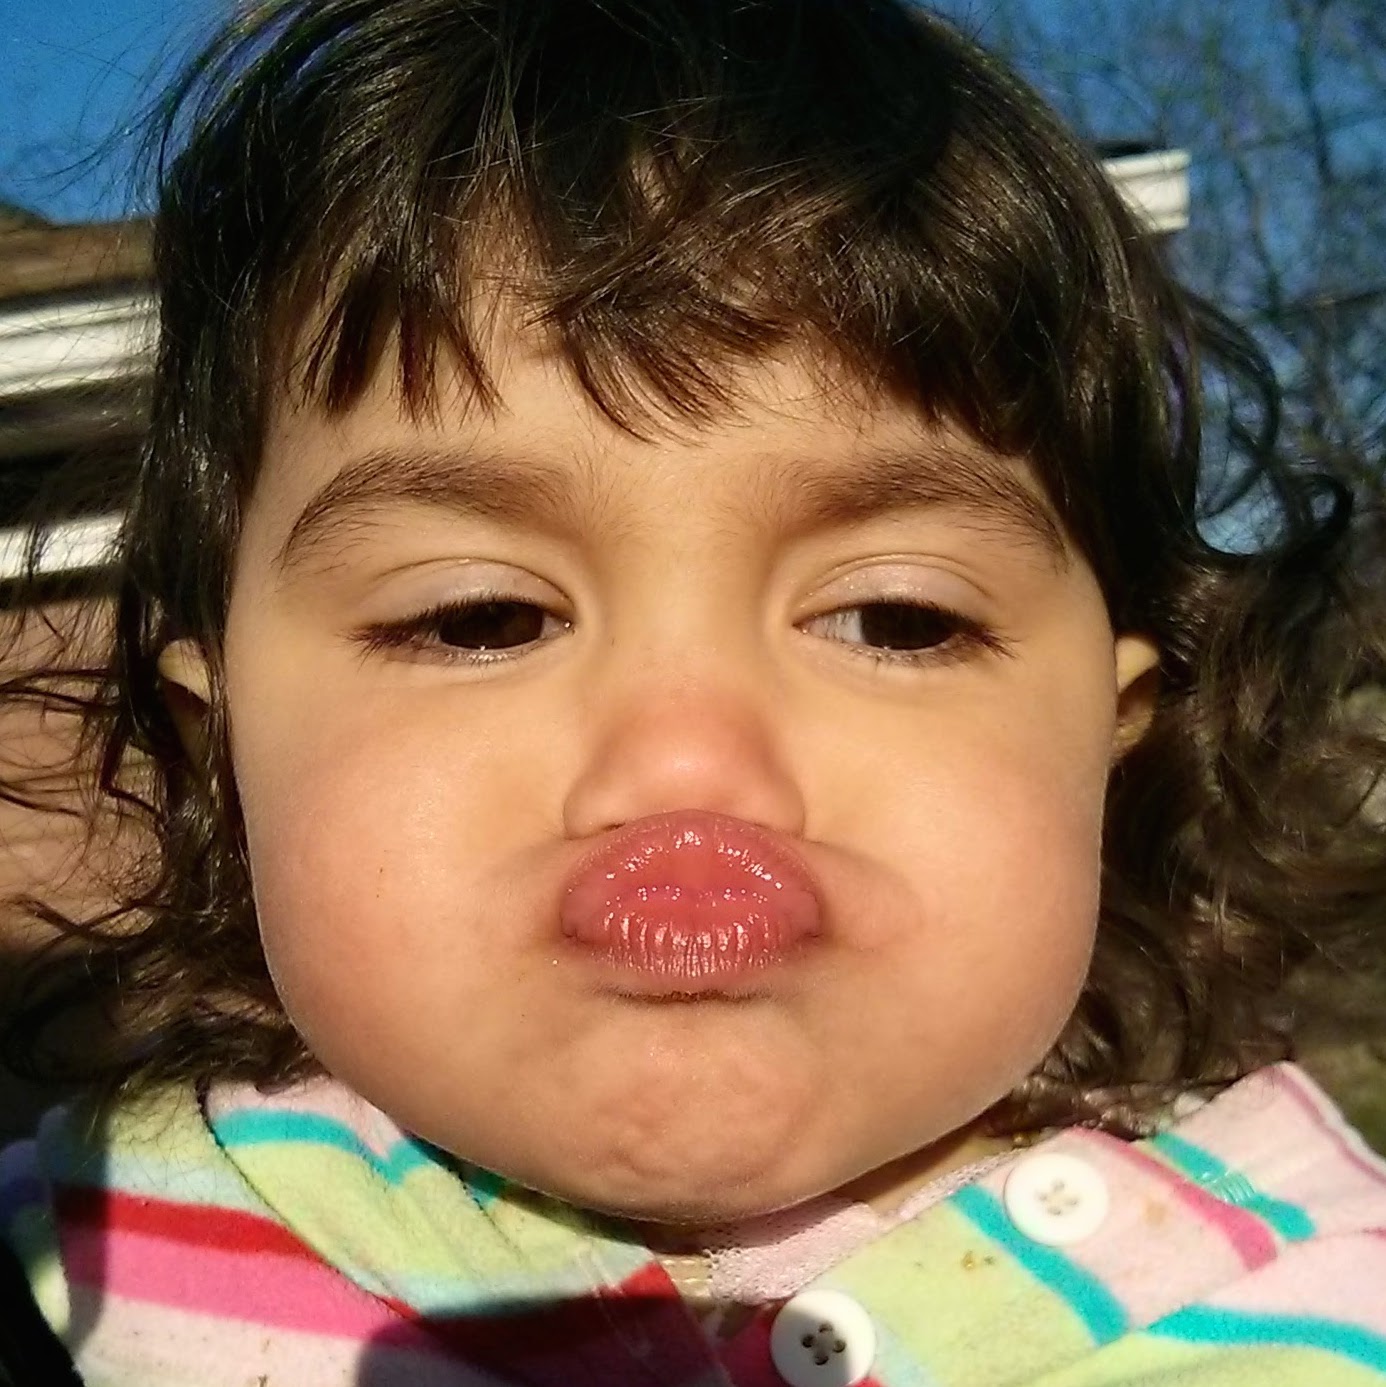 This is Emiliana Rascon, making a duckface because her father Otto has taught her the word “kiss” by making duckfaces at her. ” photo cred: Otto Rascon. “ - image